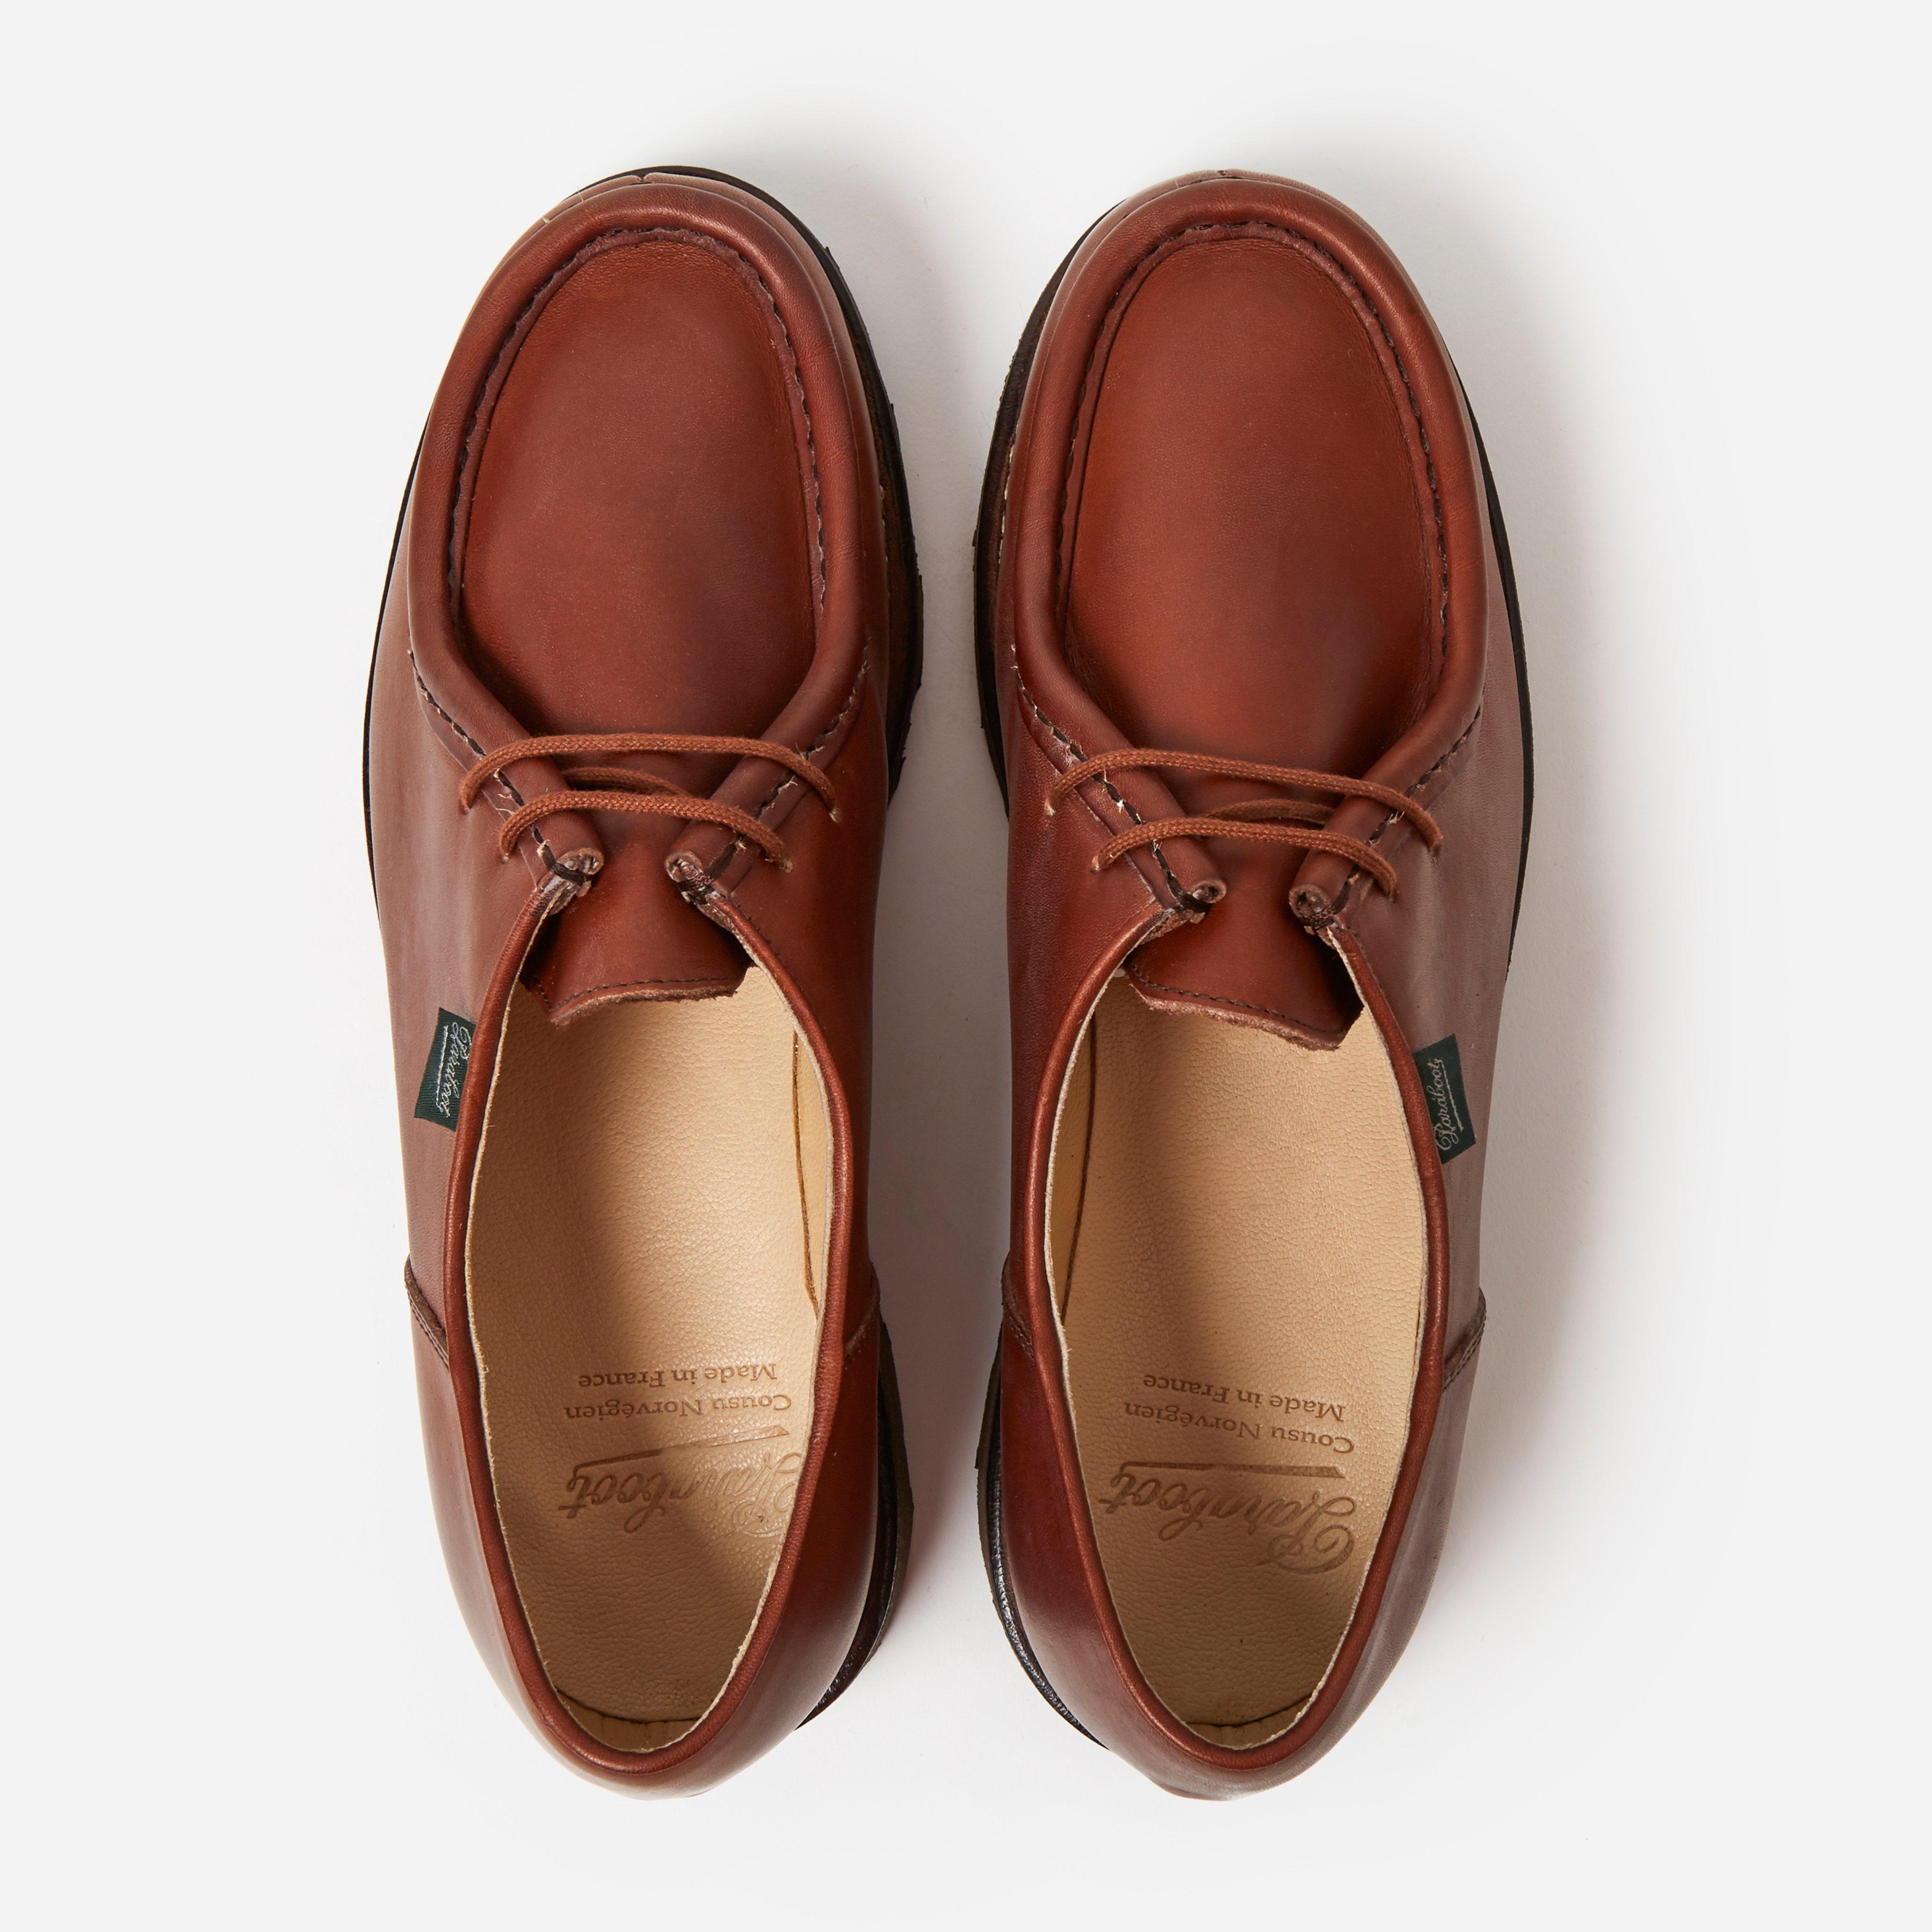 Paraboot Leather Michael Lis Marron in 